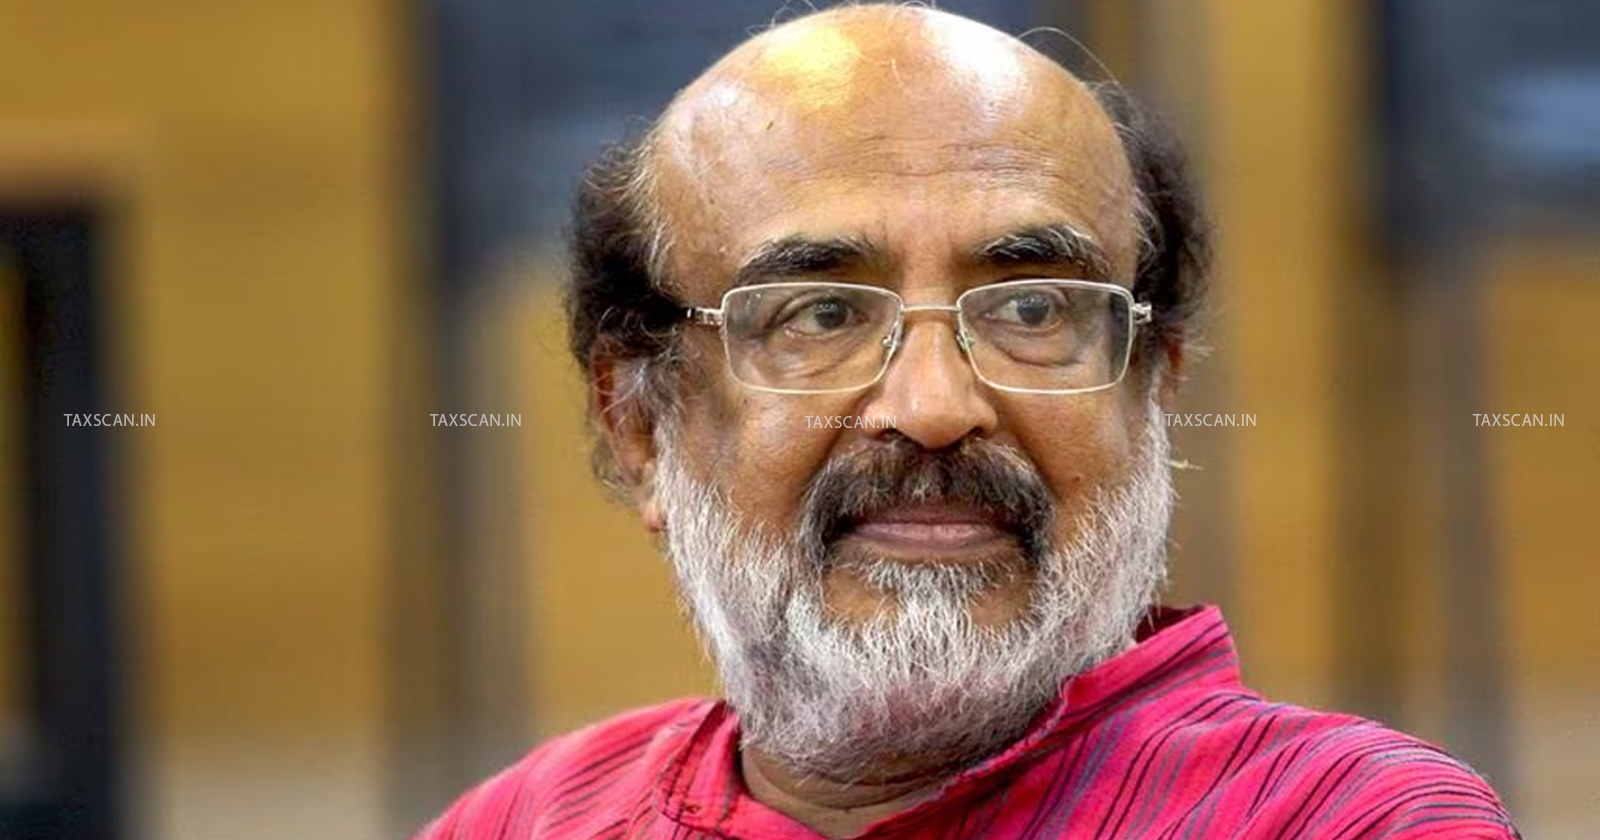 ED to Issue New Summons - Enforcement Directorate - Issue New Summons to Former State FM Thomas Isaac - New Summons to Former State FM Thomas Isaac - Former FM Thomas Isaac - TAXSCAN